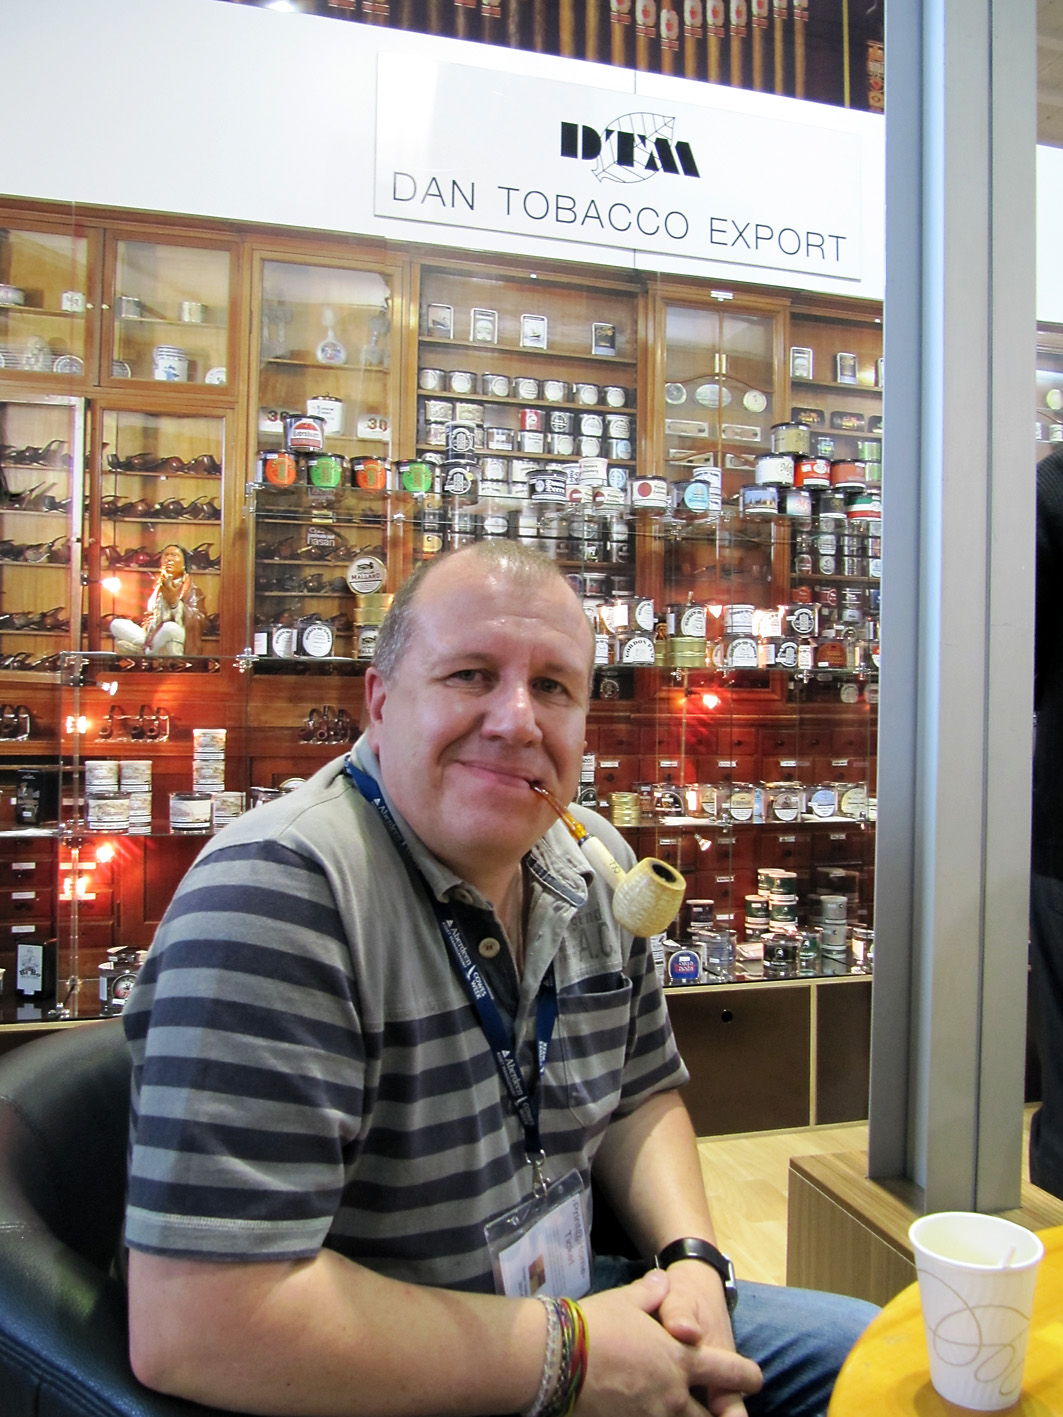 Fred at the Dan Tobacco stand